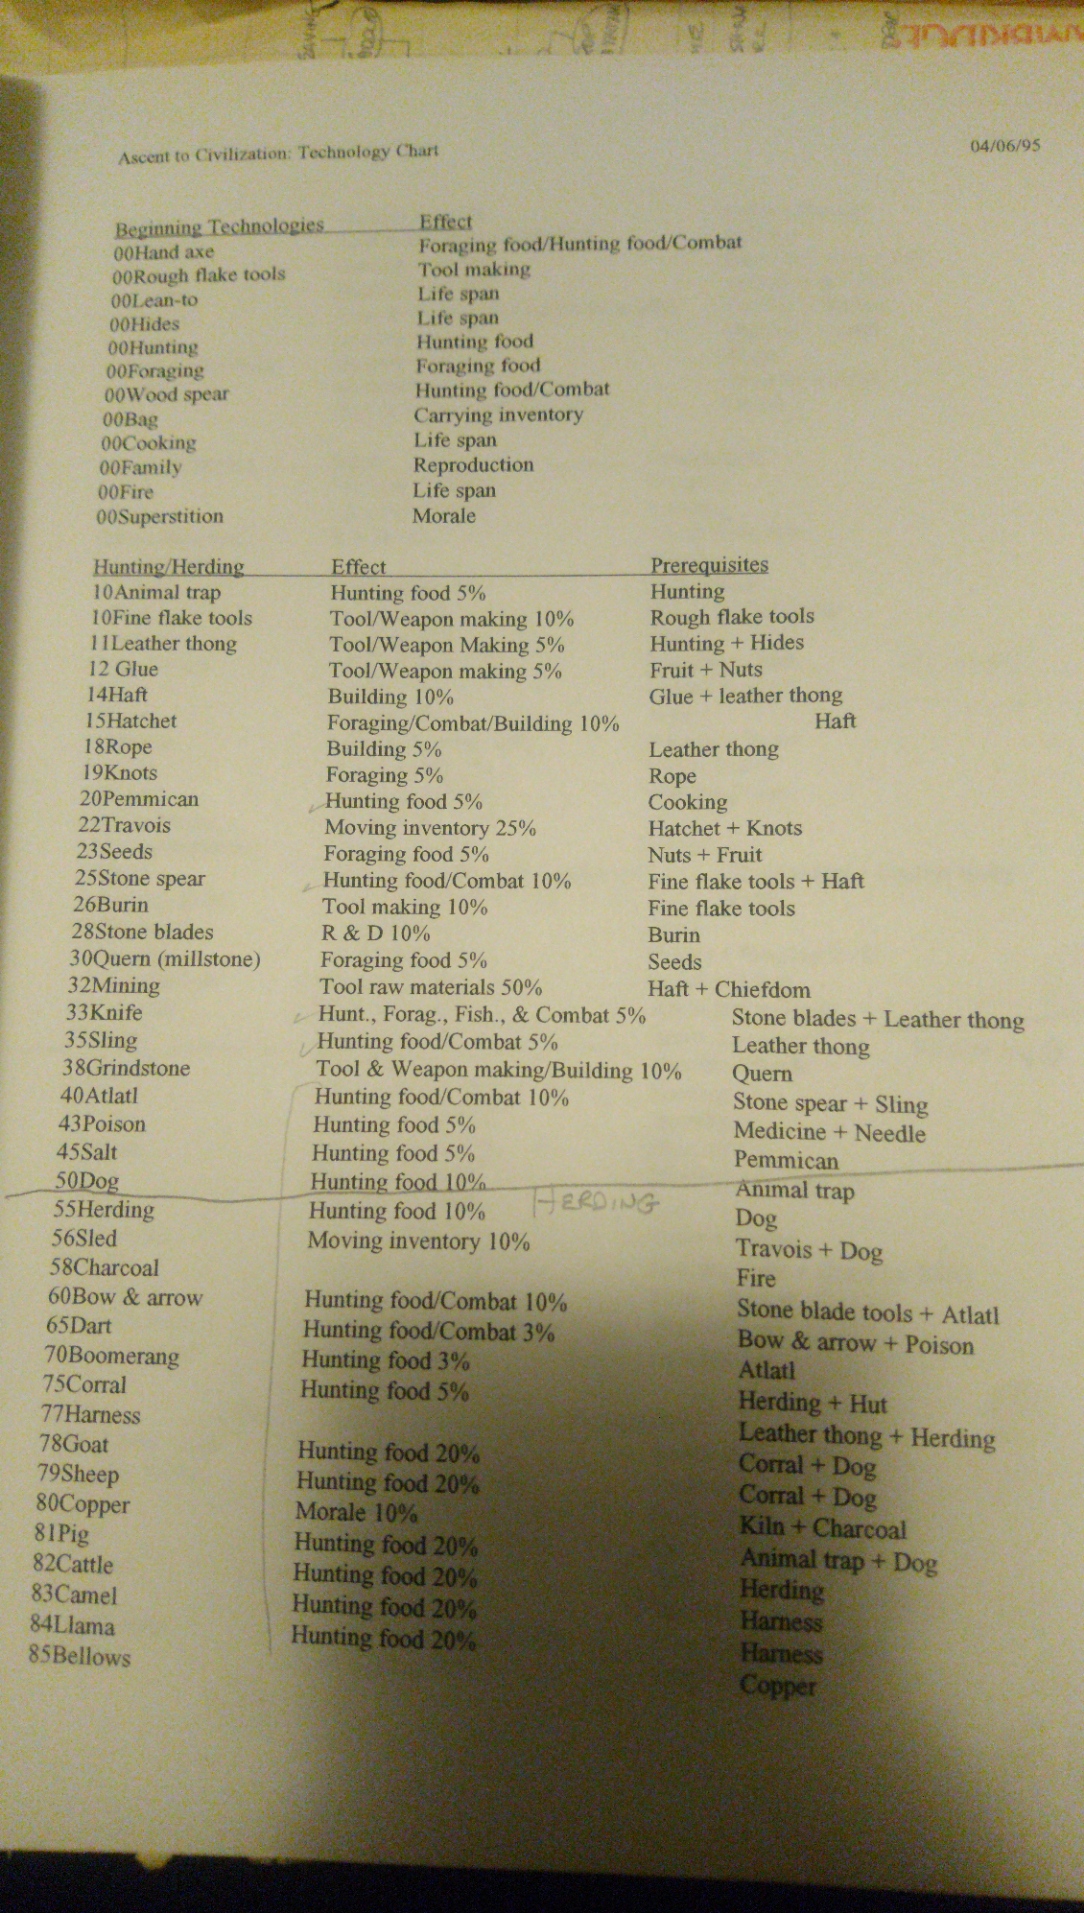 A page from a listing of how researching different technologies would impact on gameplay.